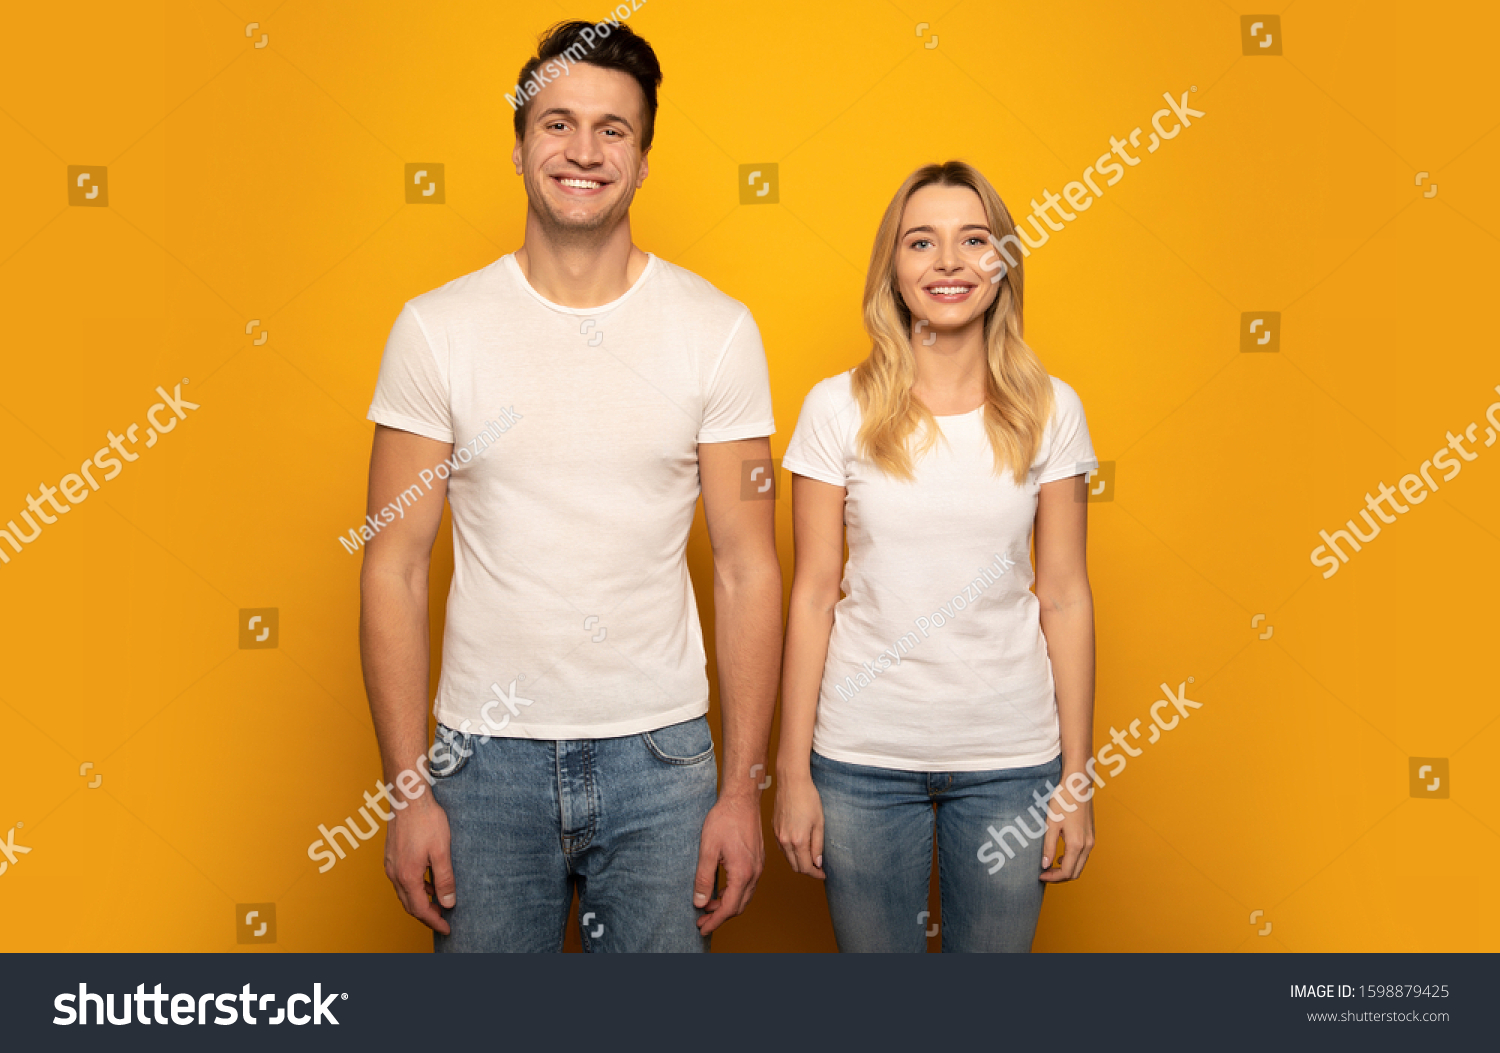 That’s us. Close-up photo of a beautiful couple, who are posing in white t-shirts on a yellow background with their arms down, looking in the camera and smiling. #1598879425